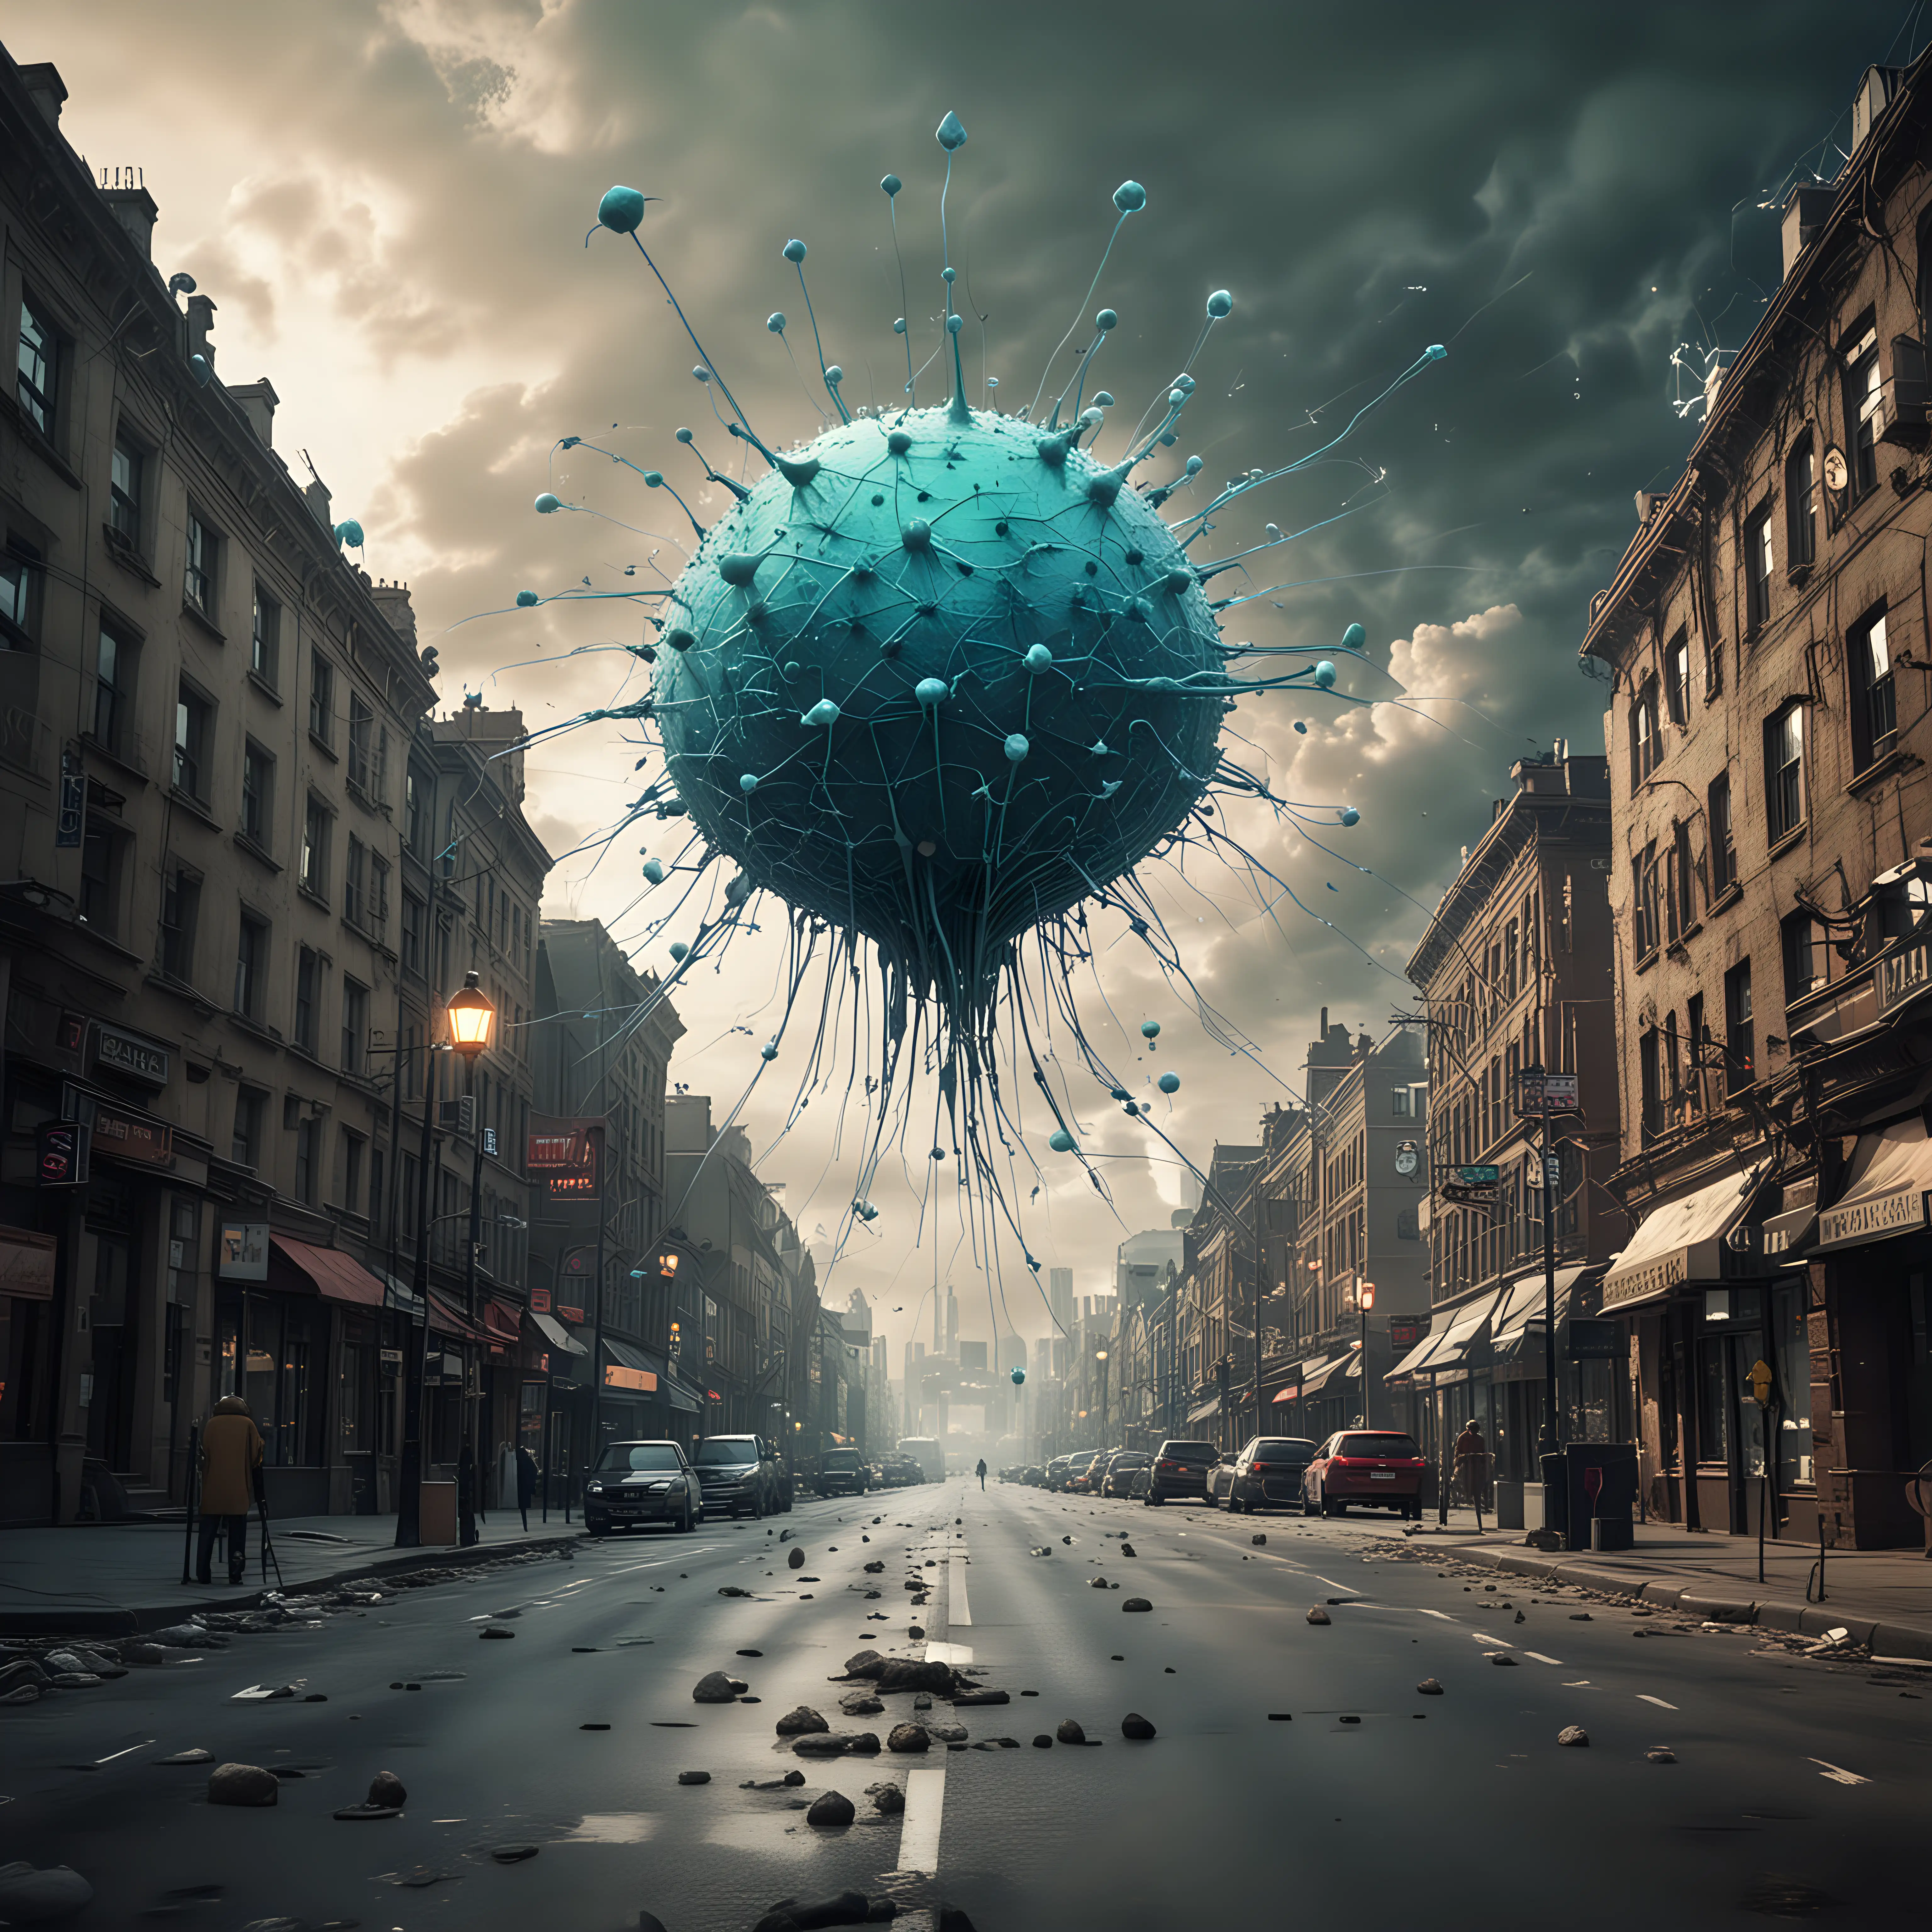 Bacteriophage-Attacking-City-Viral-Microbes-Overrun-Urban-Landscape